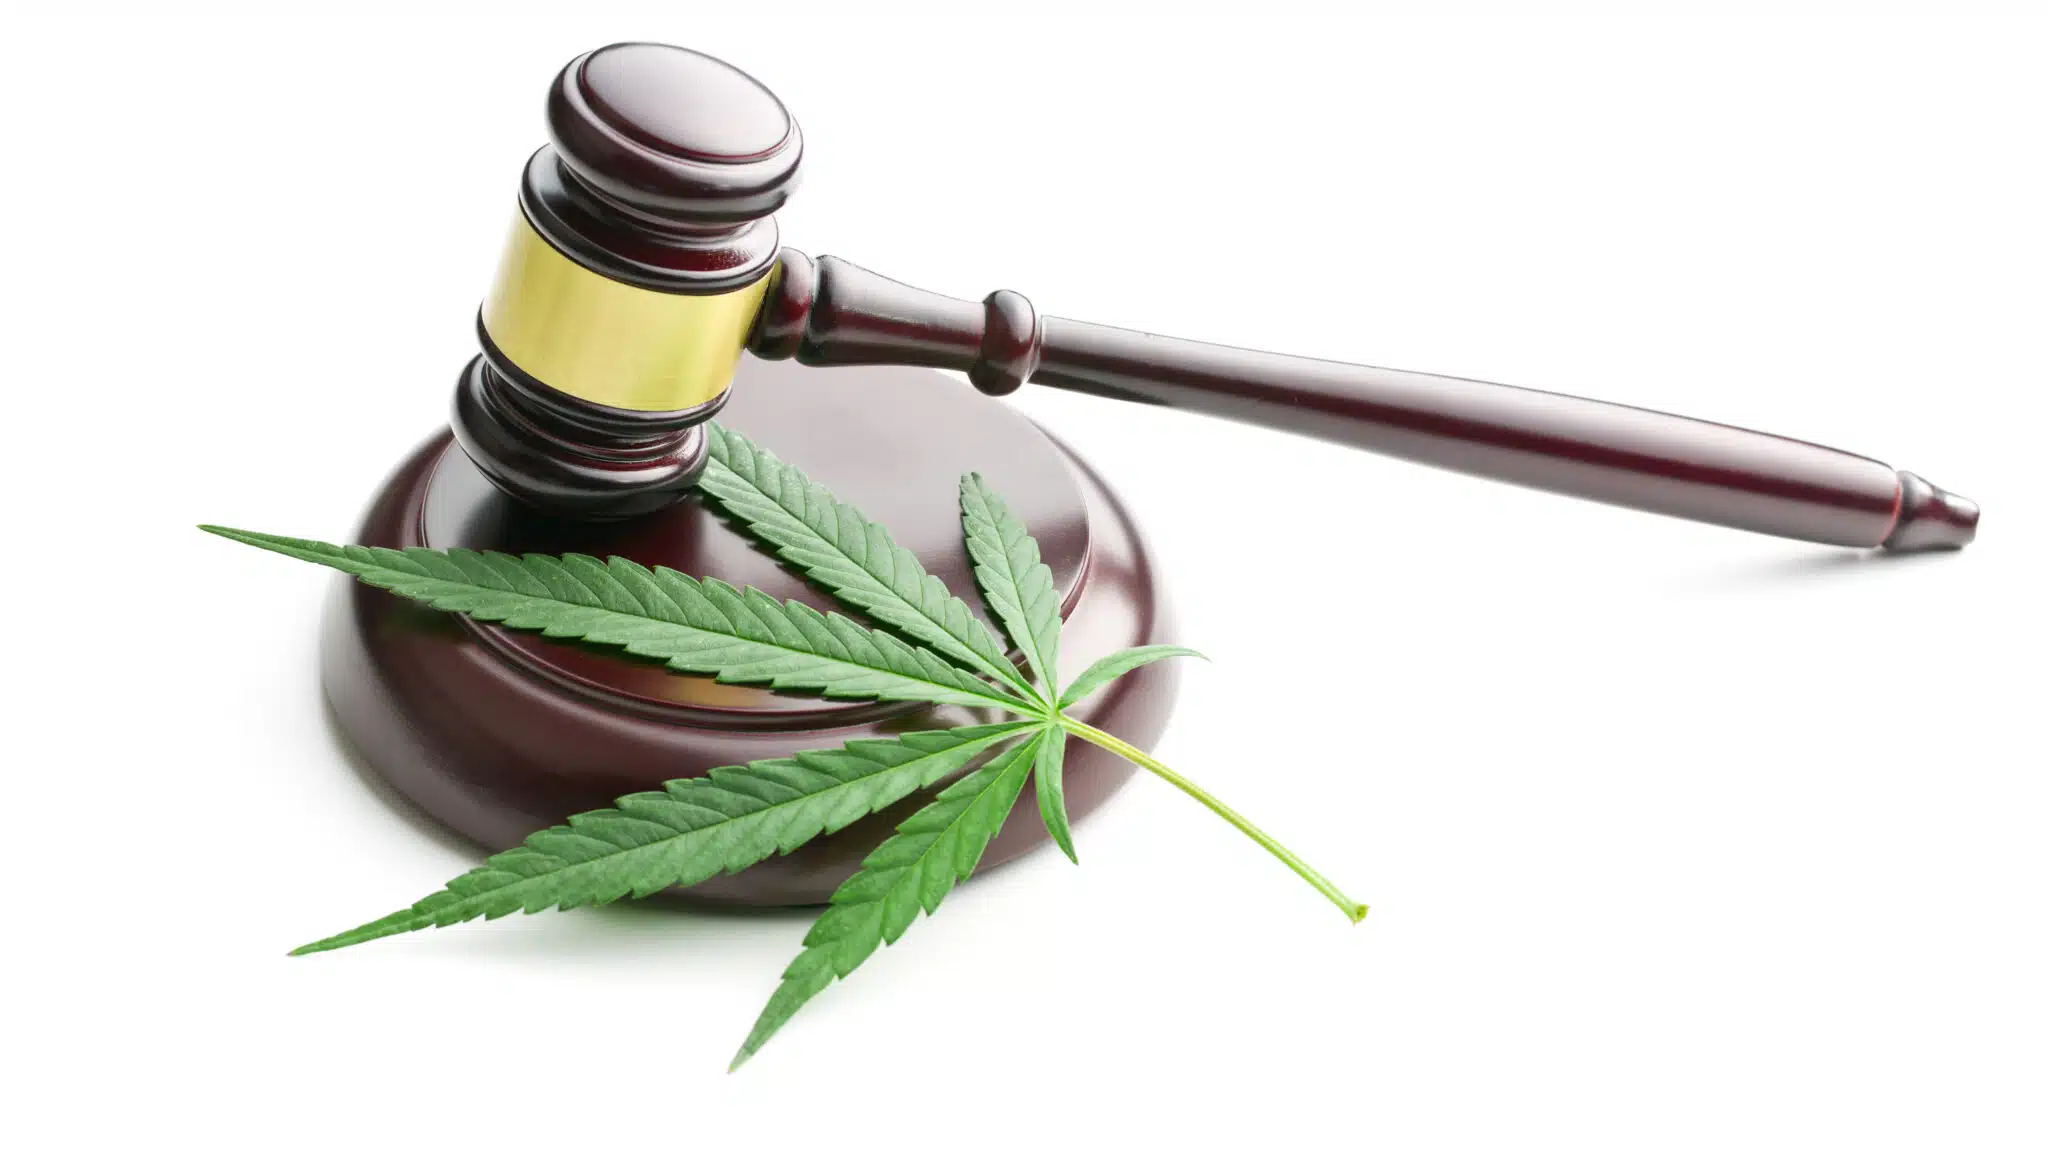 A judge's gavel and a marijuana leaf lay on a block - Cannabis Laws The Federal Government Vs. Massachusetts